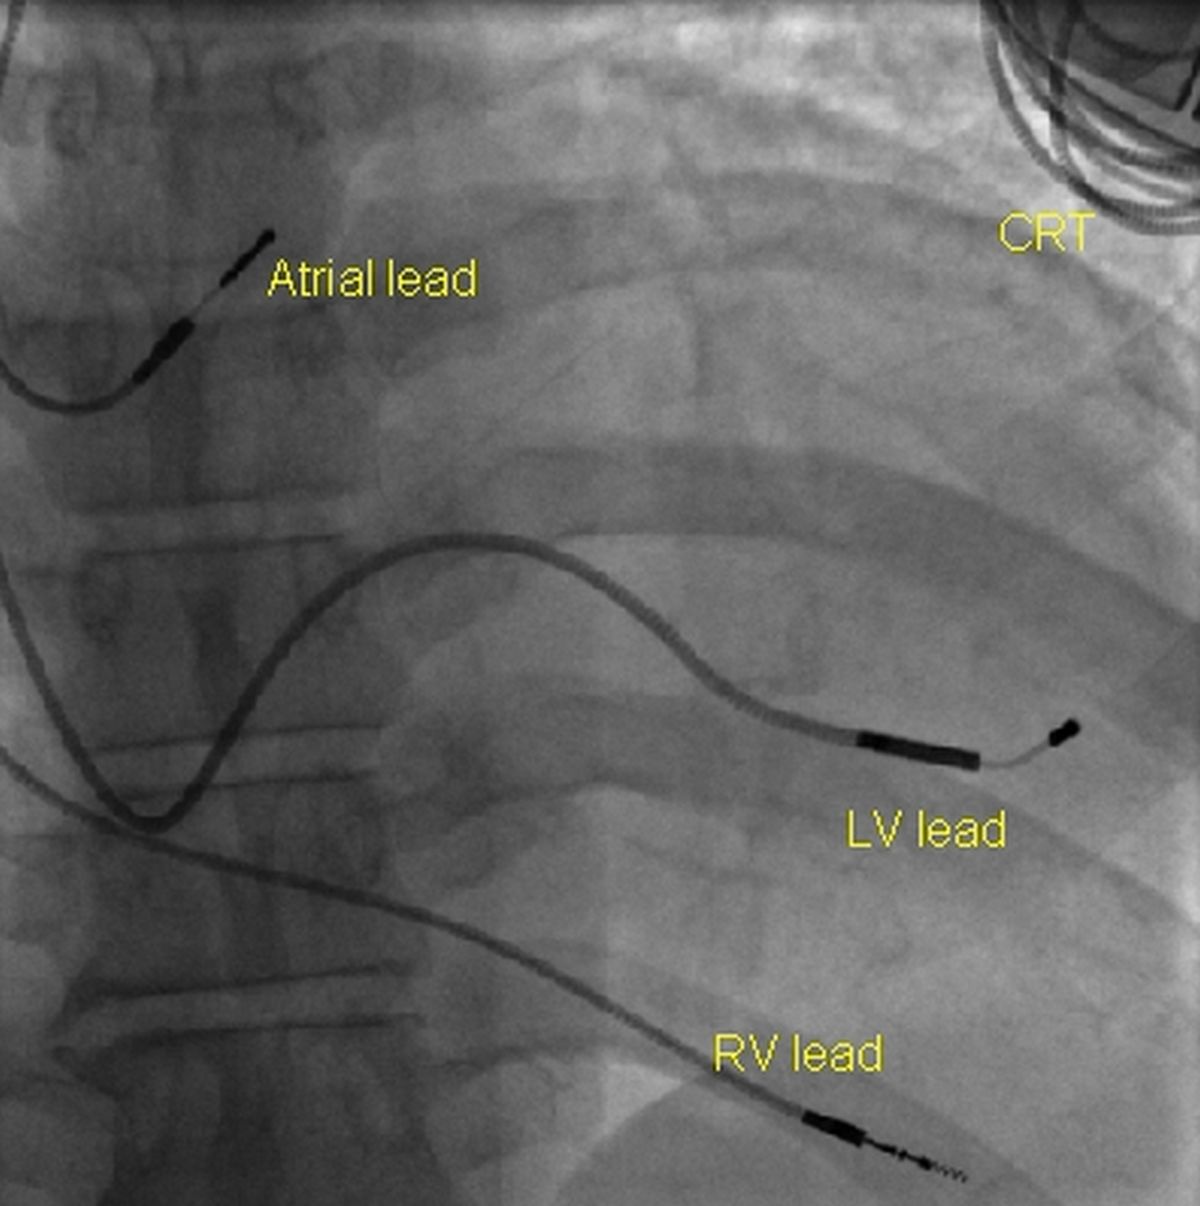 Fluoroscopic view of three leads of a CRT